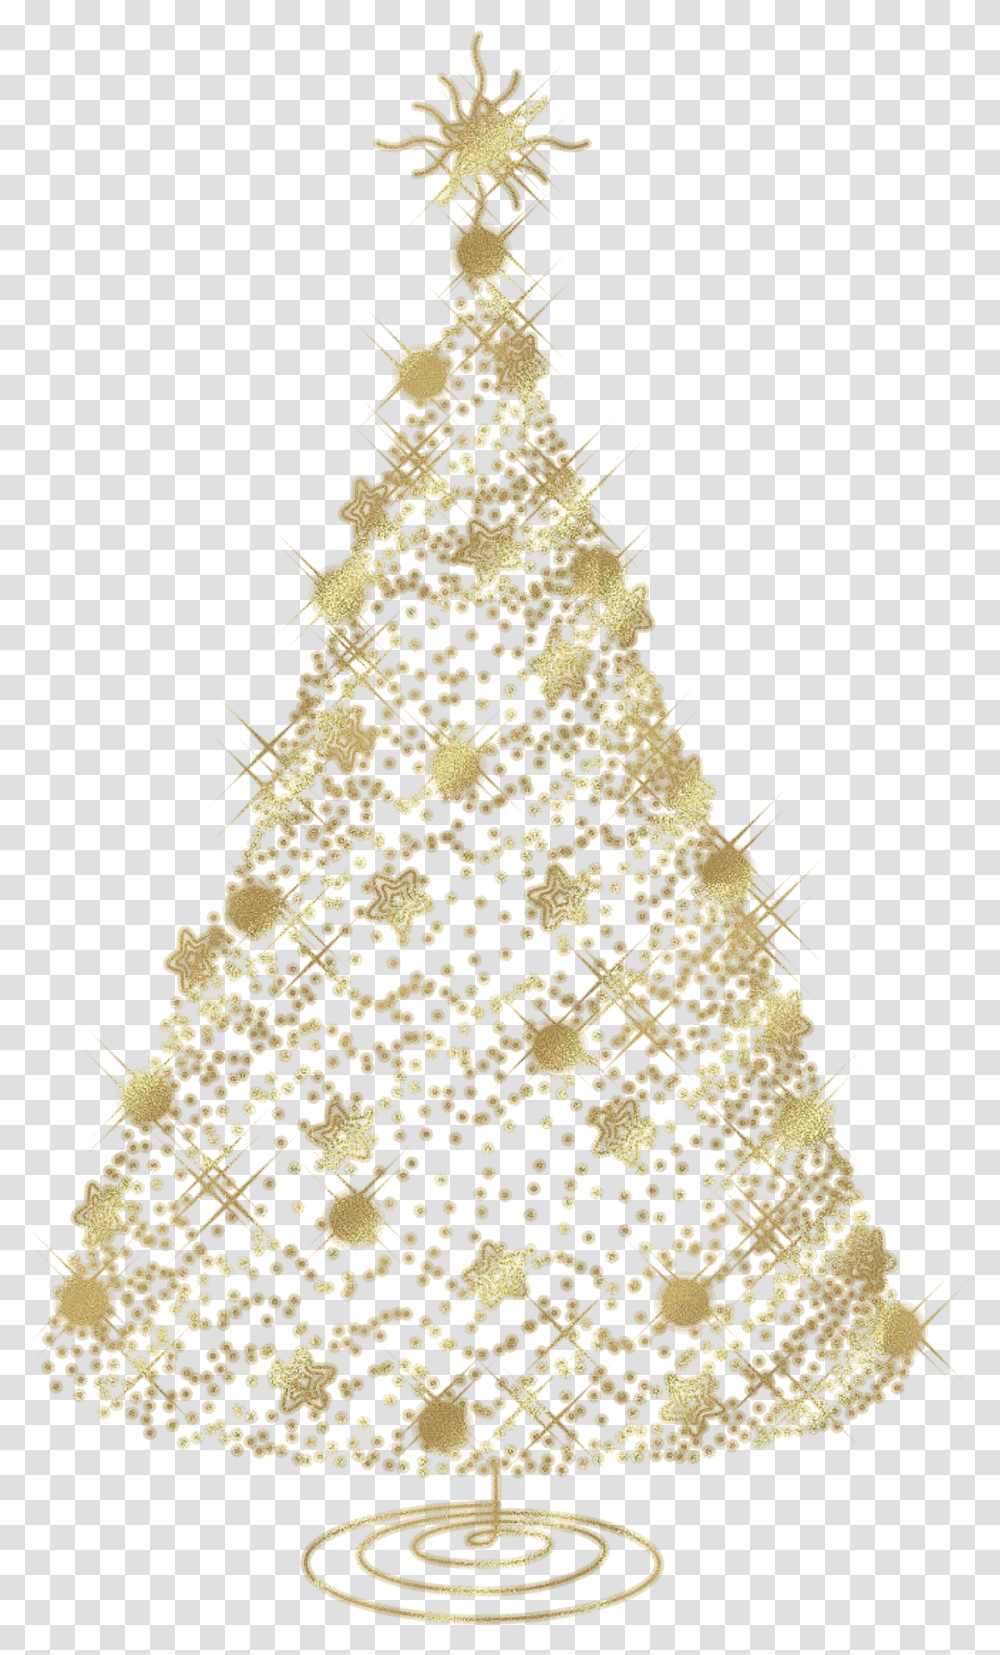 Christmas Tree Clip Art Background Christmas Gold Tree Transparent Png